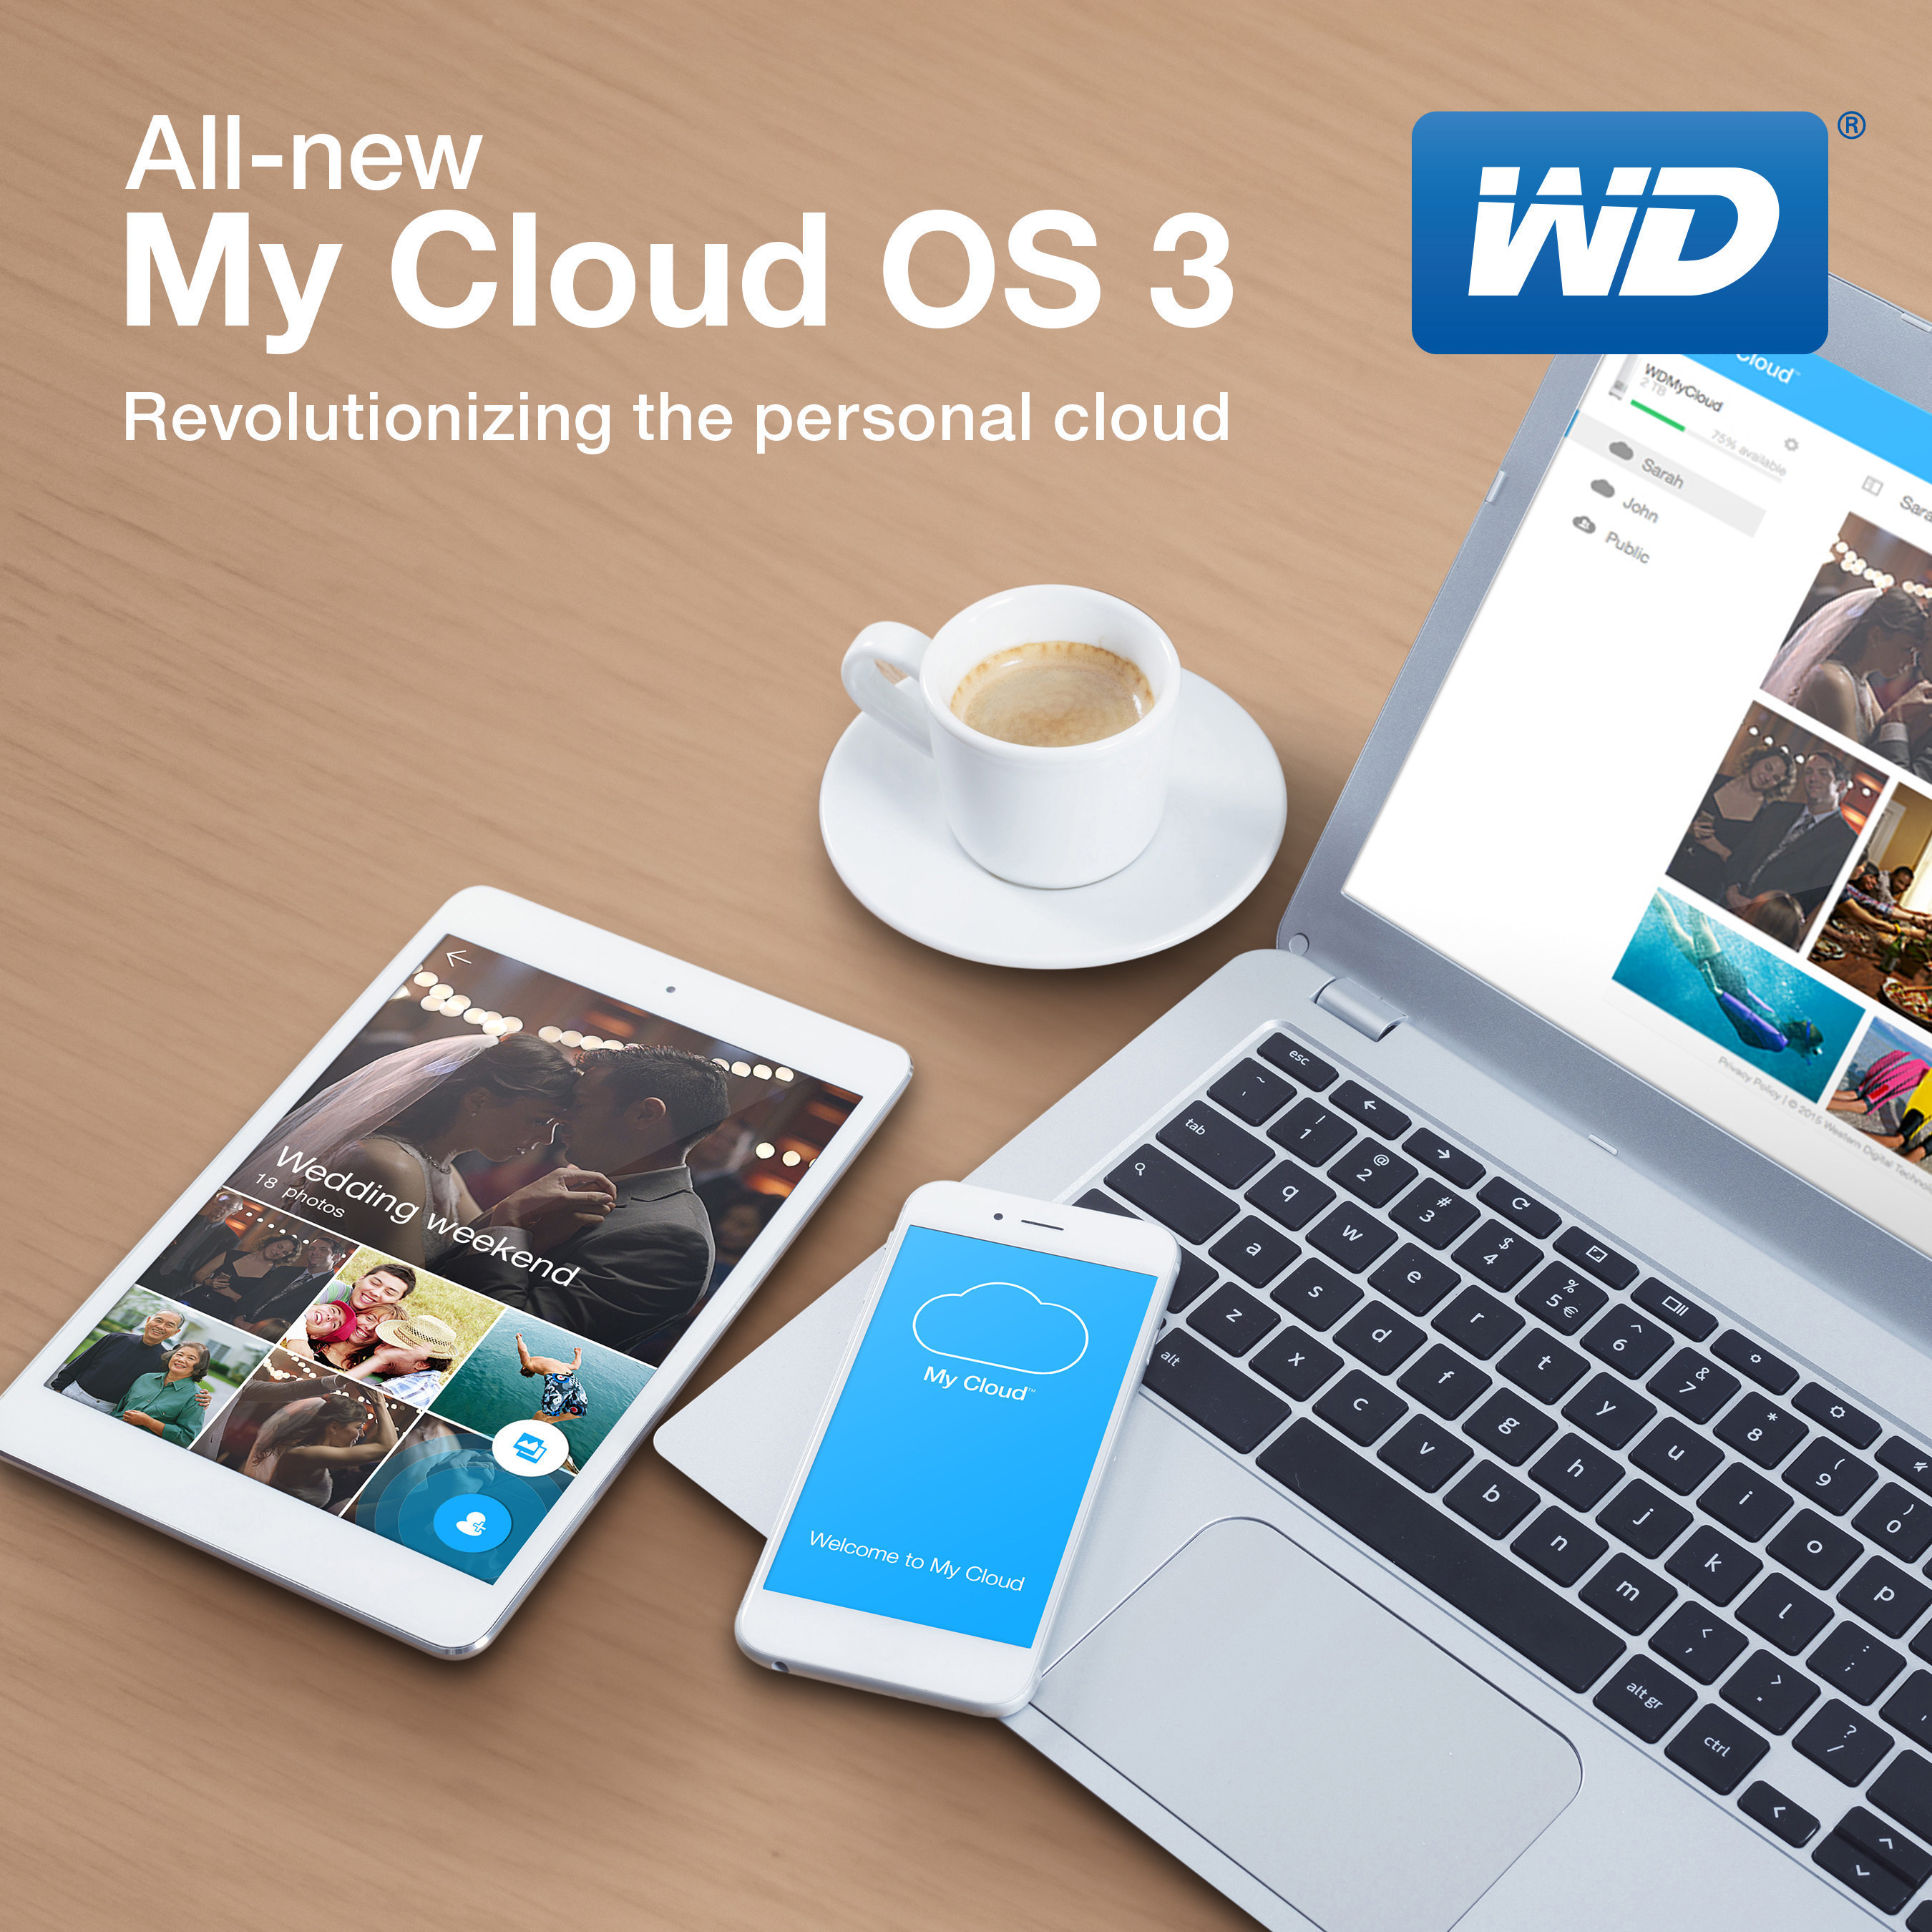 WD Makes Cloud Storage More Personal (And Private)